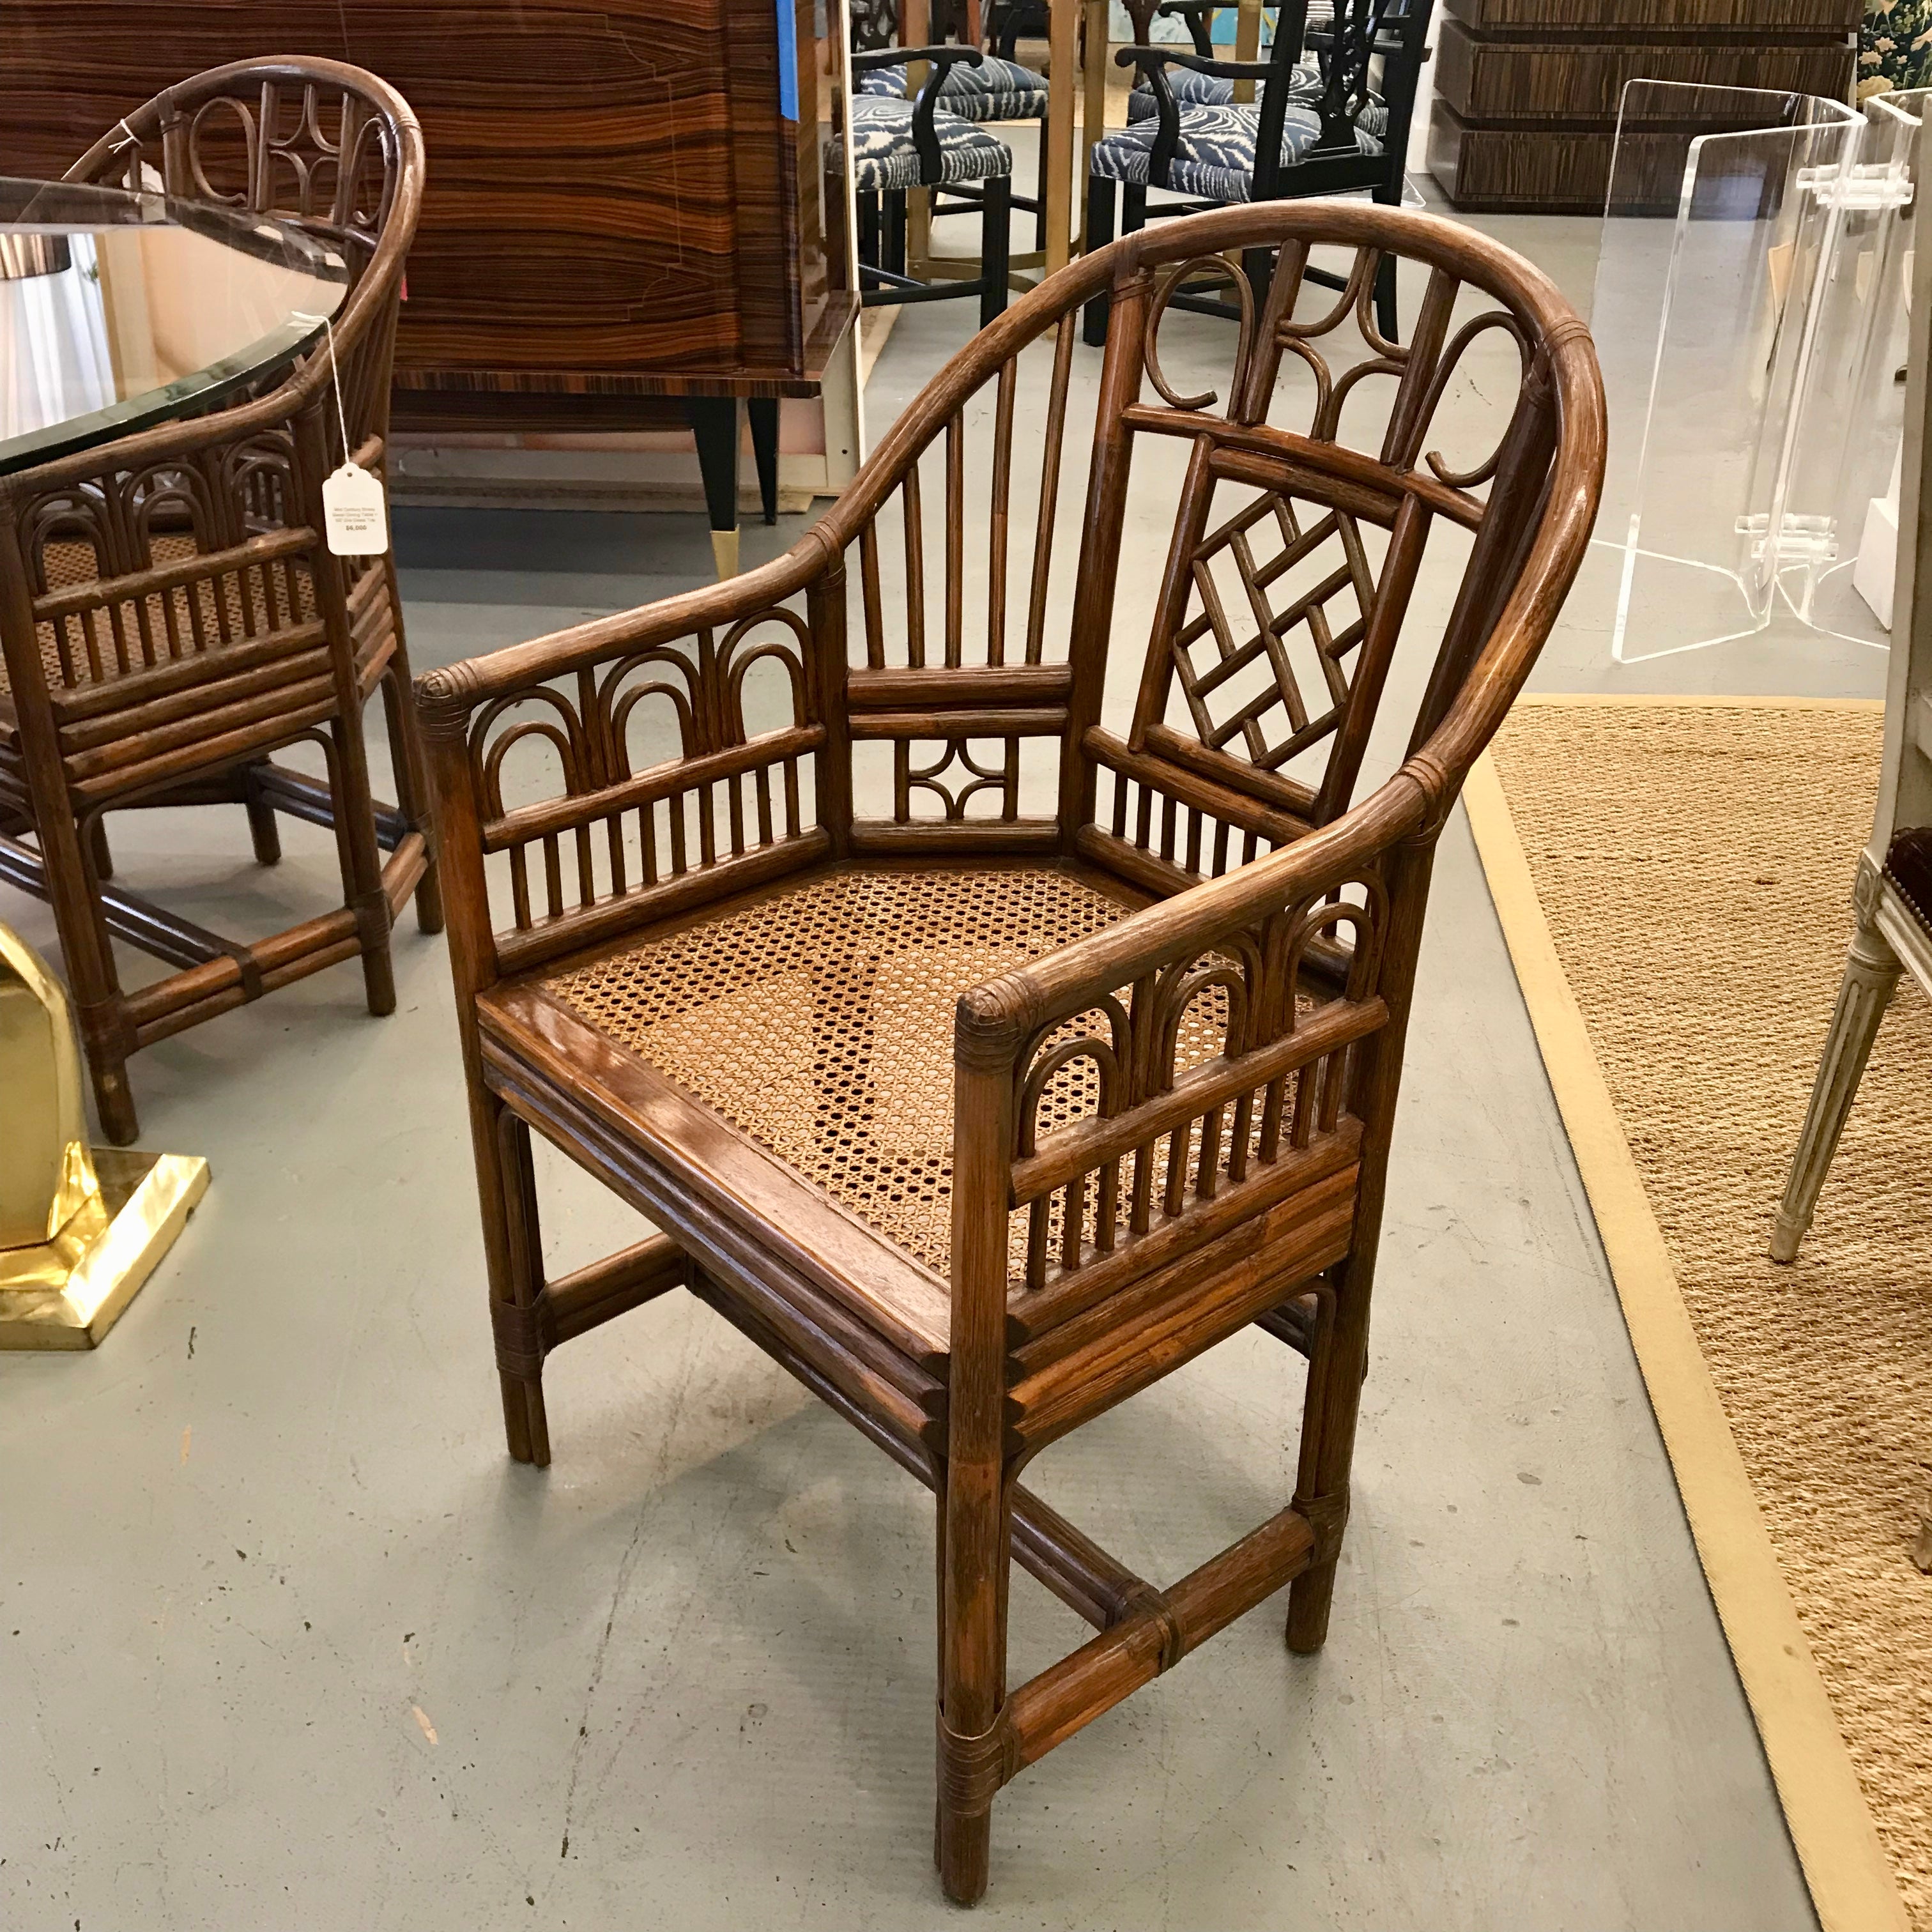 Four Wicker Chair Set 4 Bamboo Chairs Brighton Style Wicker Furniture